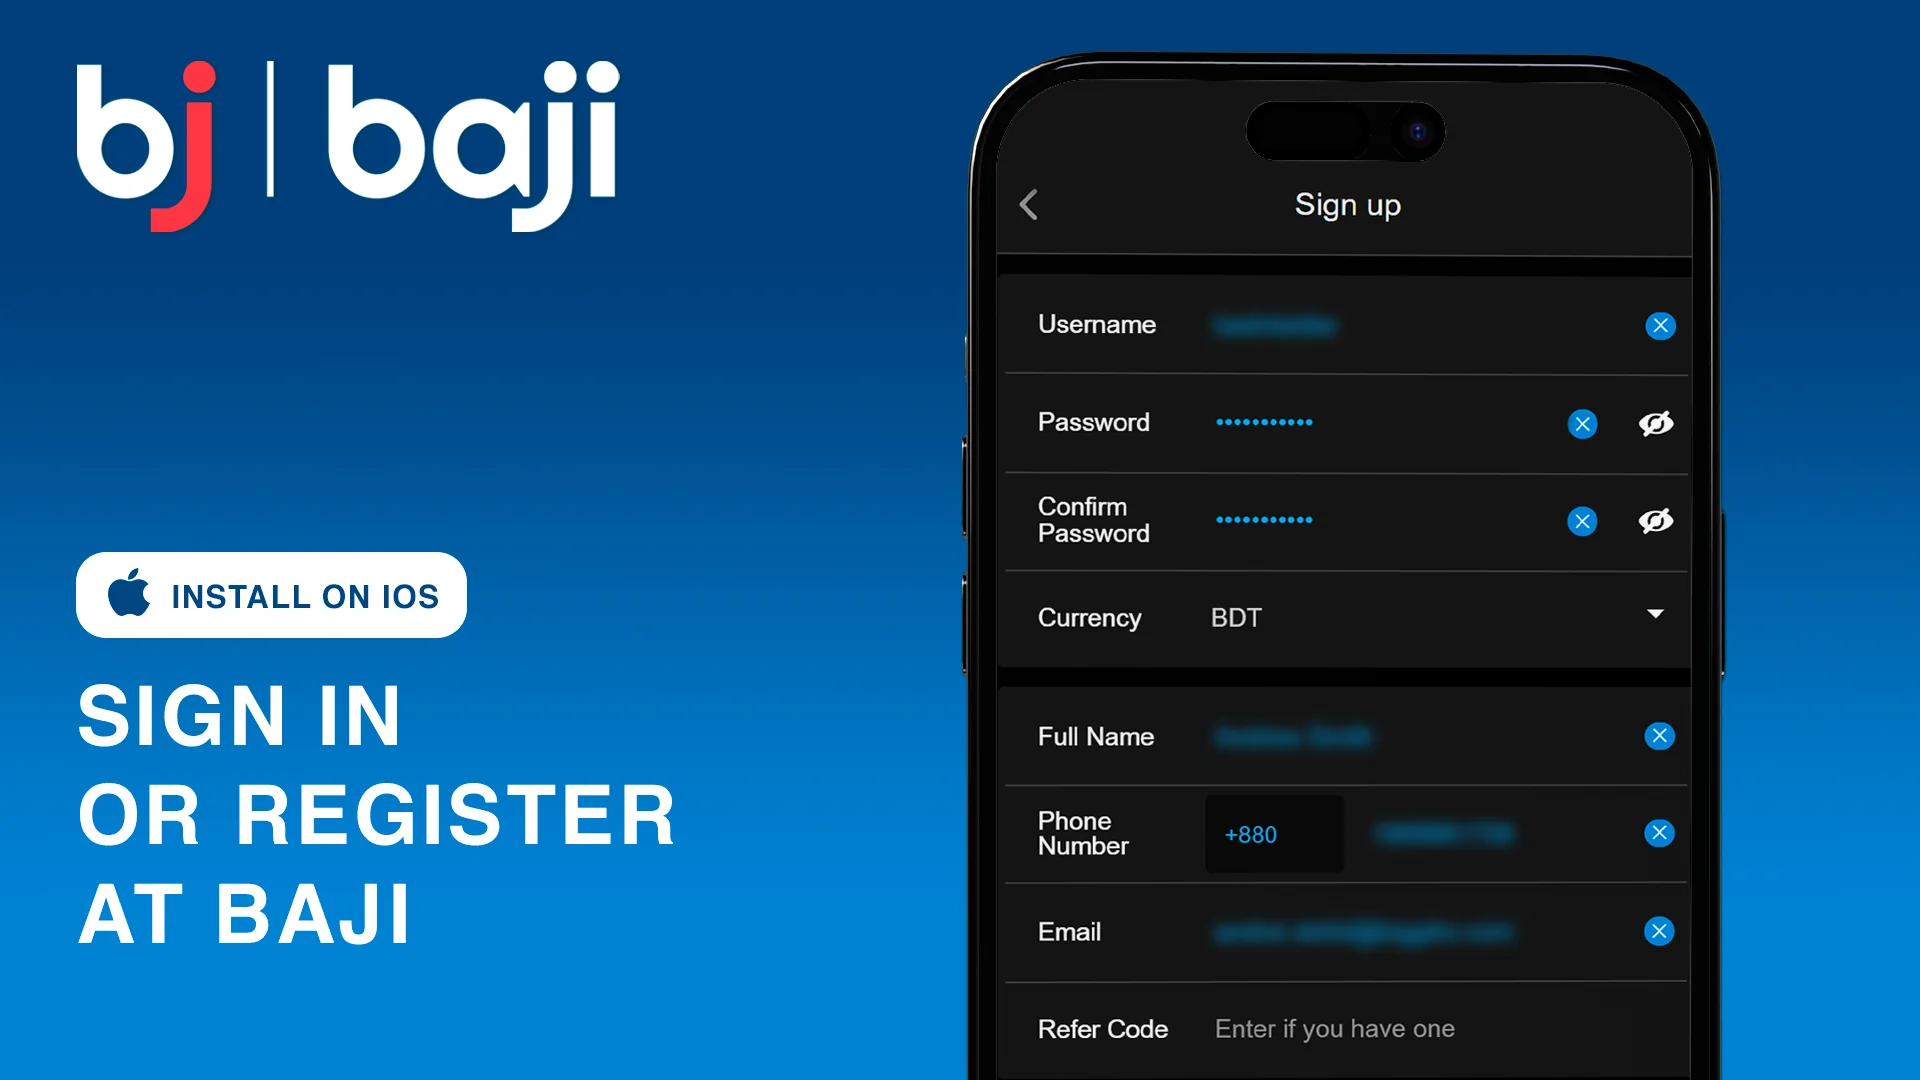 Sign in or Register at Baji - App for iOS